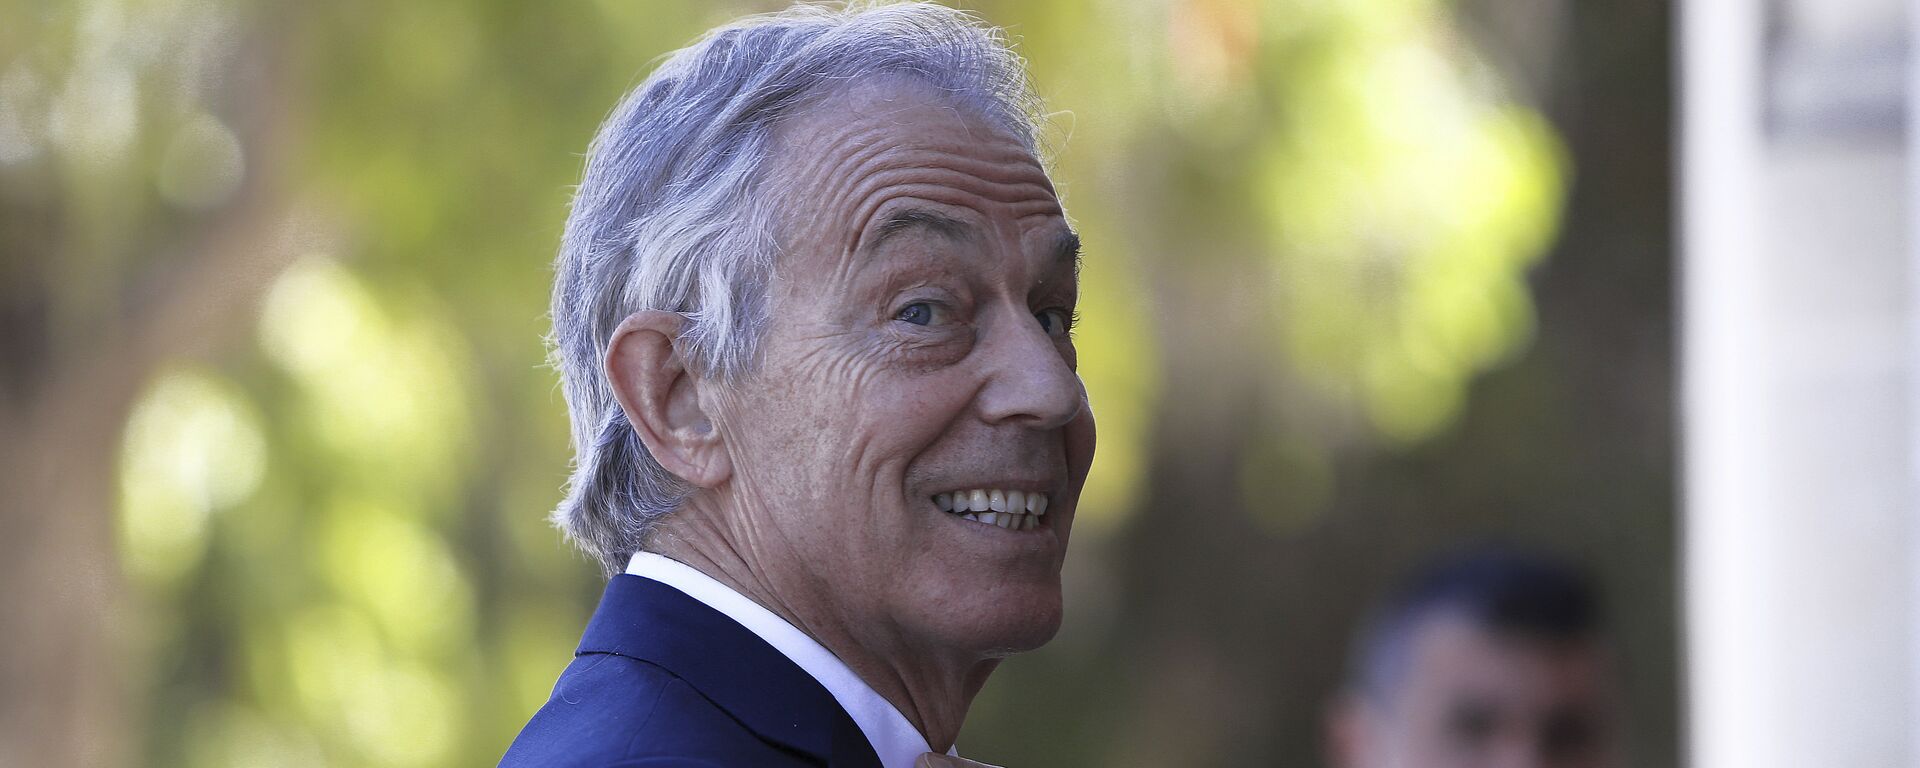 Former British Prime Minister Tony Blair arrives at the presidential palace for a meeting with Cyprus' President Nicos Anastasiades in capital Nicosia, Cyprus, Wednesday, April 4, 2018. - Sputnik International, 1920, 02.01.2022